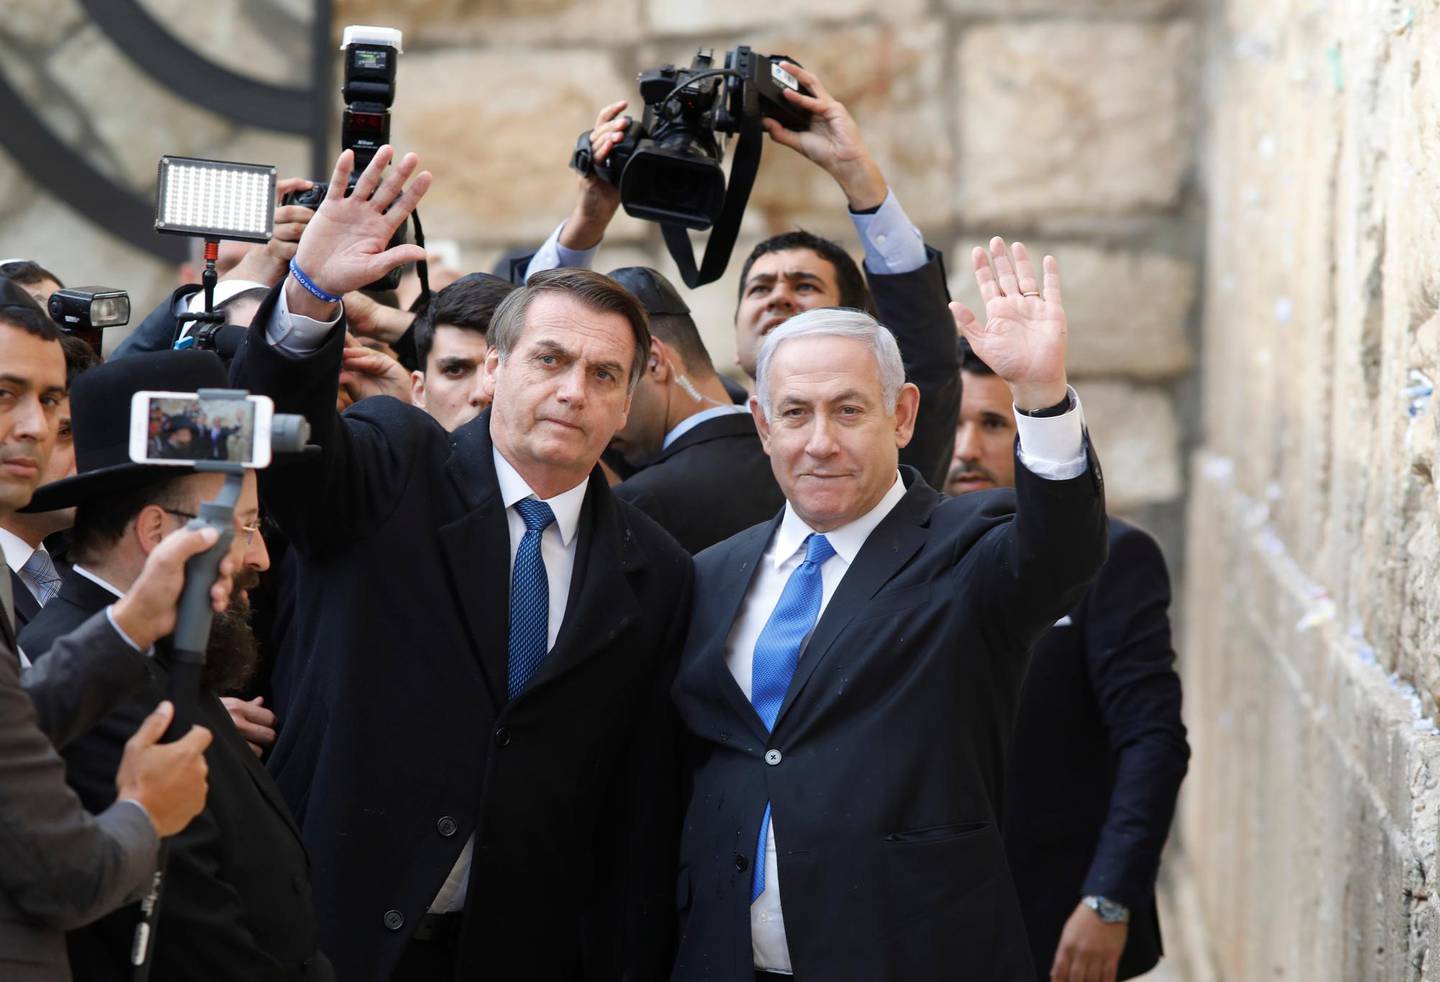 Brazilian President Jair Bolsonaro, left, and Israeli Prime Minister Benjamin Netanyahu wave to journalists during a visit to the Western wall, the holiest site where Jews can pray, in the Old City of Jerusalem, Monday, April 1, 2019.  (Menahem Kahana/Pool Photo via AP)